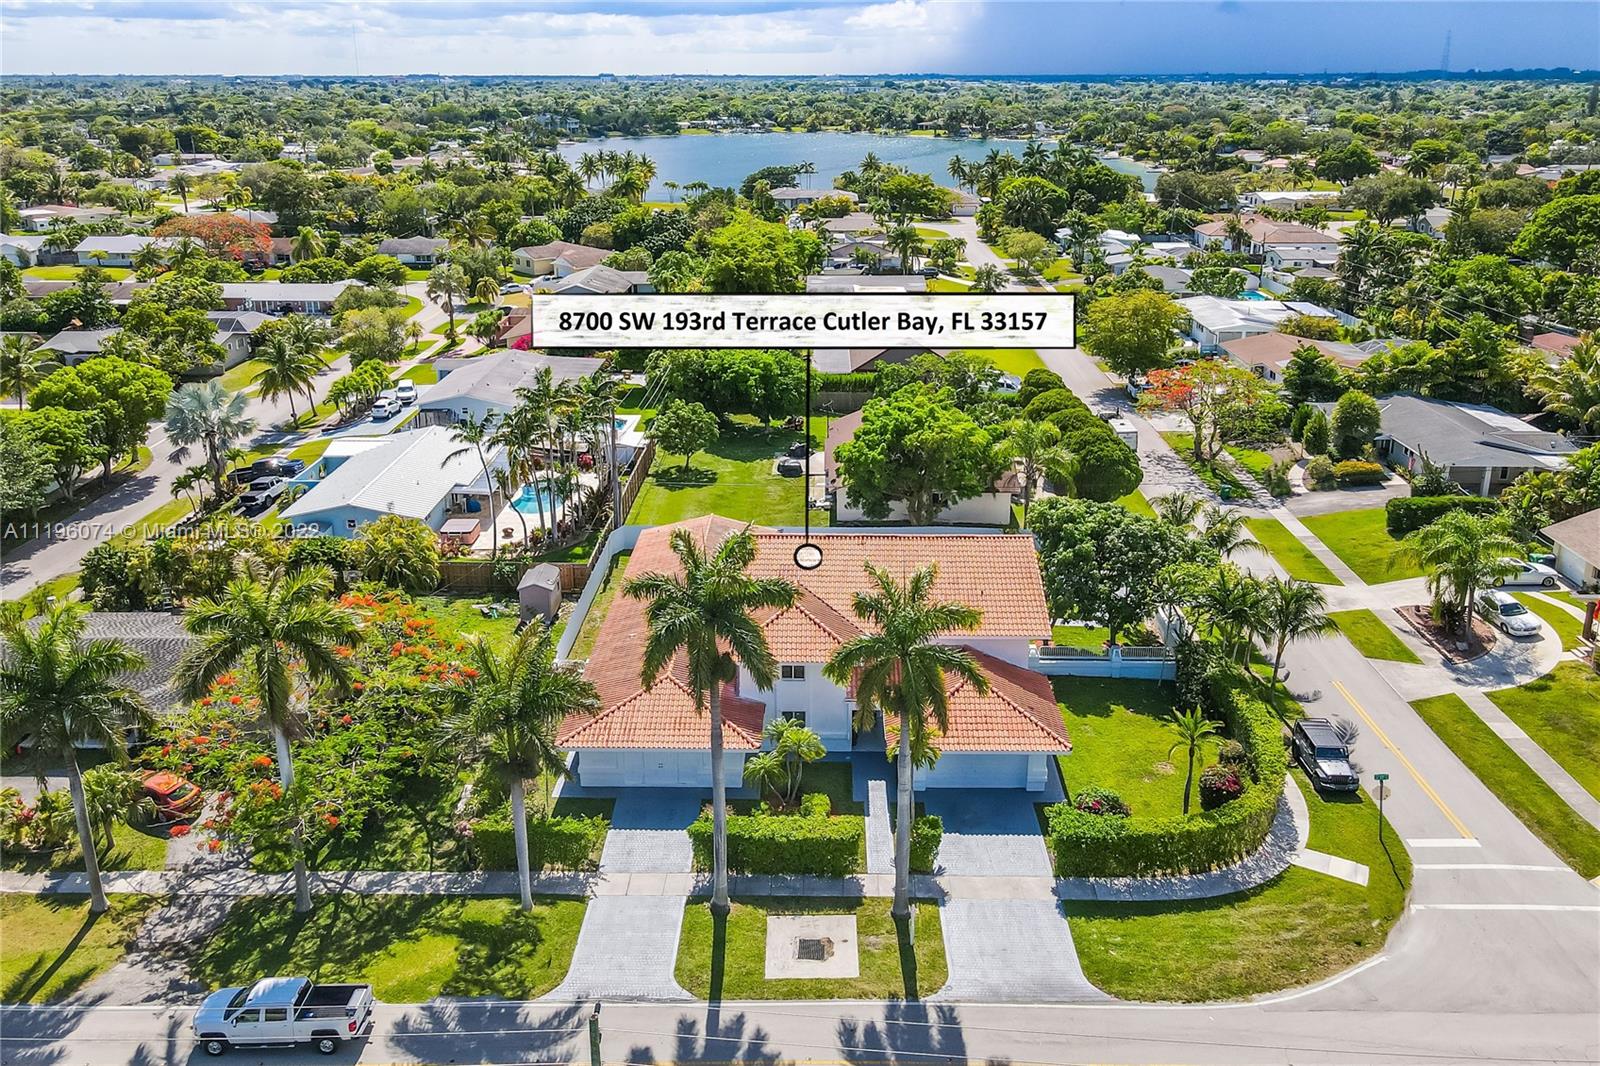 Don’t miss an incredible opportunity to buy a partial remodeled house in Cutler Bay. New Ceramic floor, new kitchen, This over 6,000 sft home has five bedrooms and 5.5 baths including an oversized in-law’s suite, and separate entrance. Double height ceiling in the formal living/dining room. The corner lot features three driveways, a two-car garage, a huge pool and whirlpool spa, expansive covered terrace, and fruit trees. Look no further than this spacious home waiting for your personal touch and a new family to make it their own!